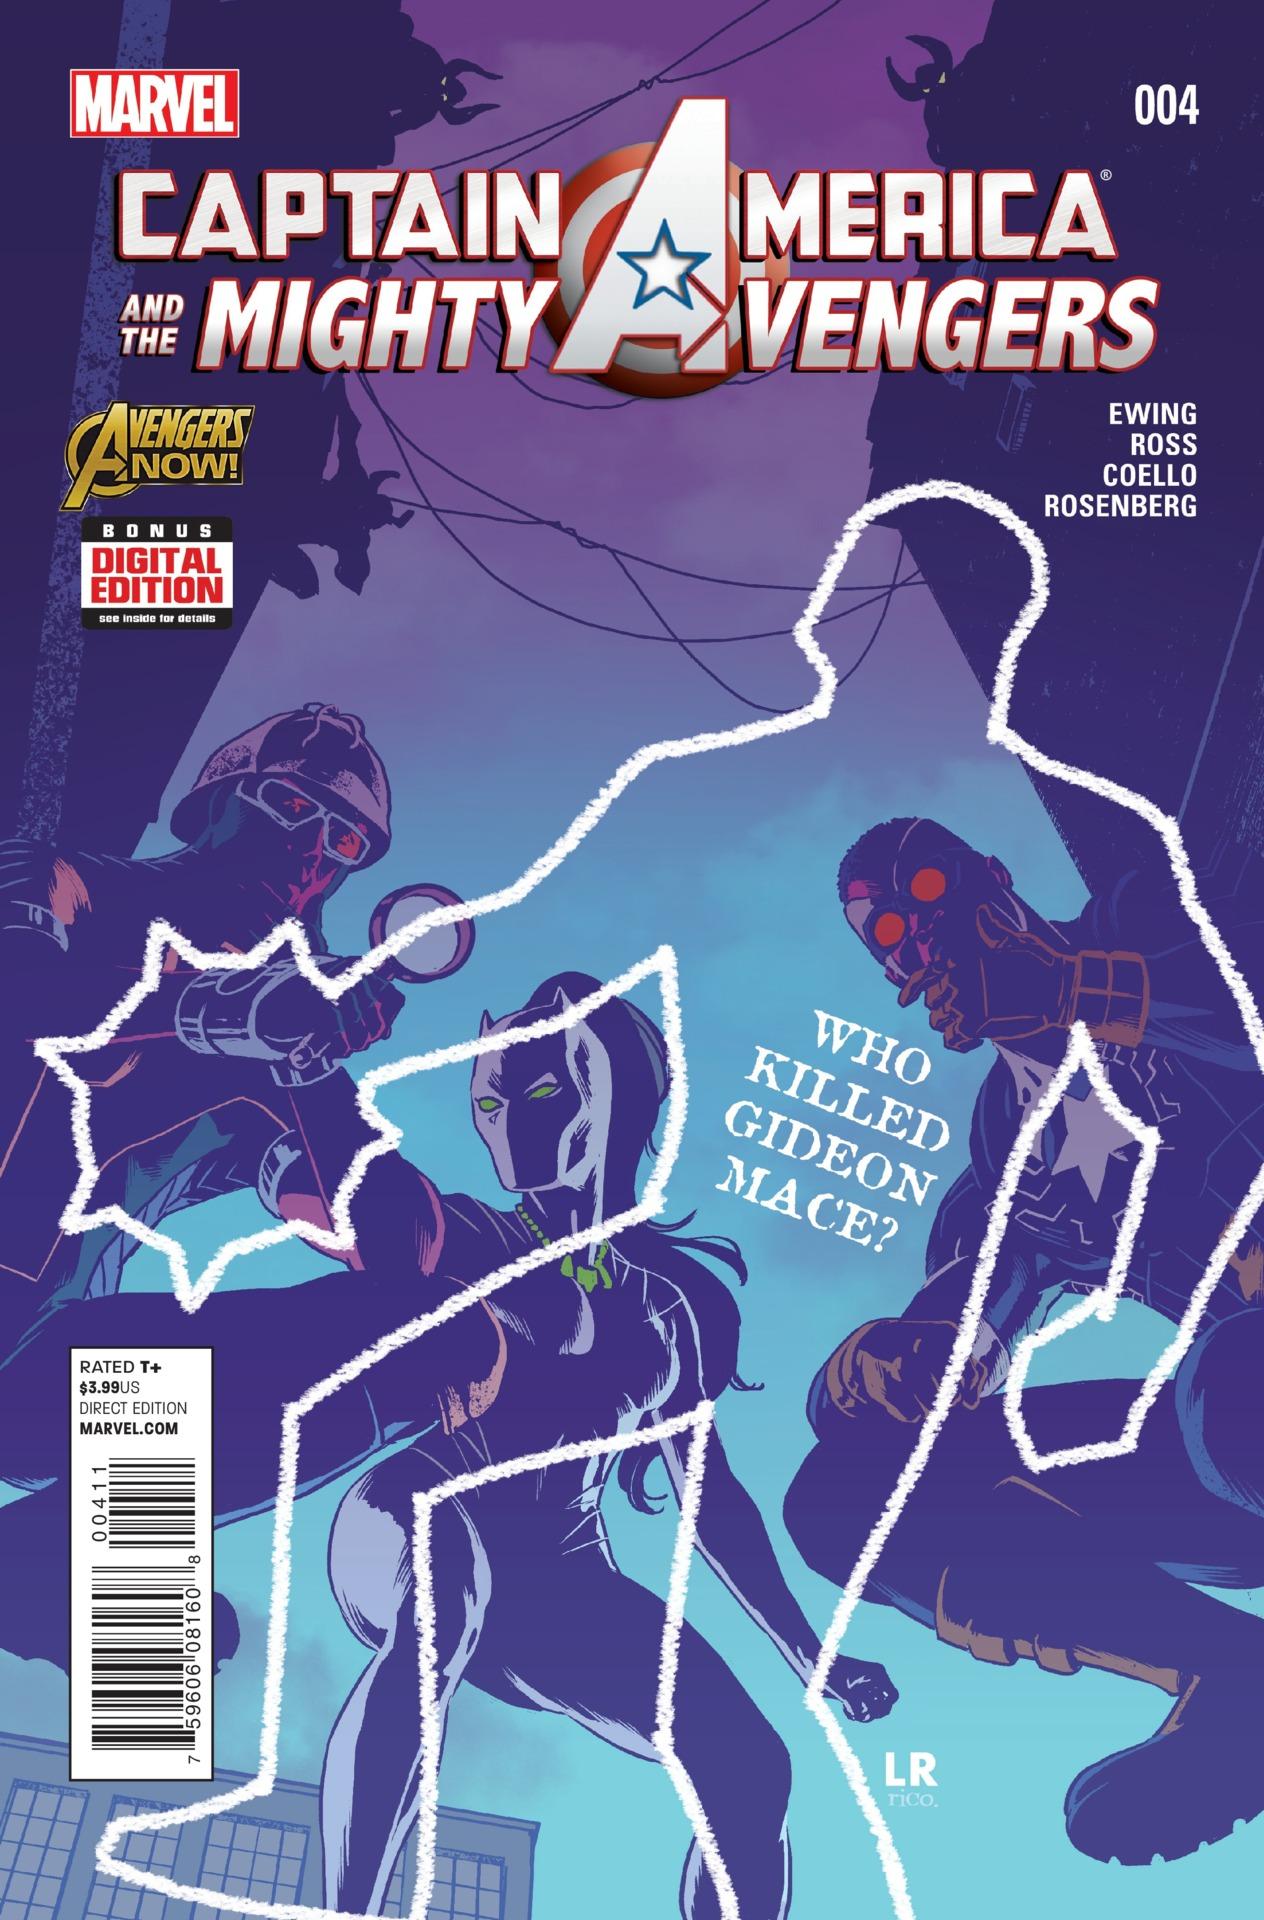 Captain America and the Mighty Avengers Vol. 1 #4